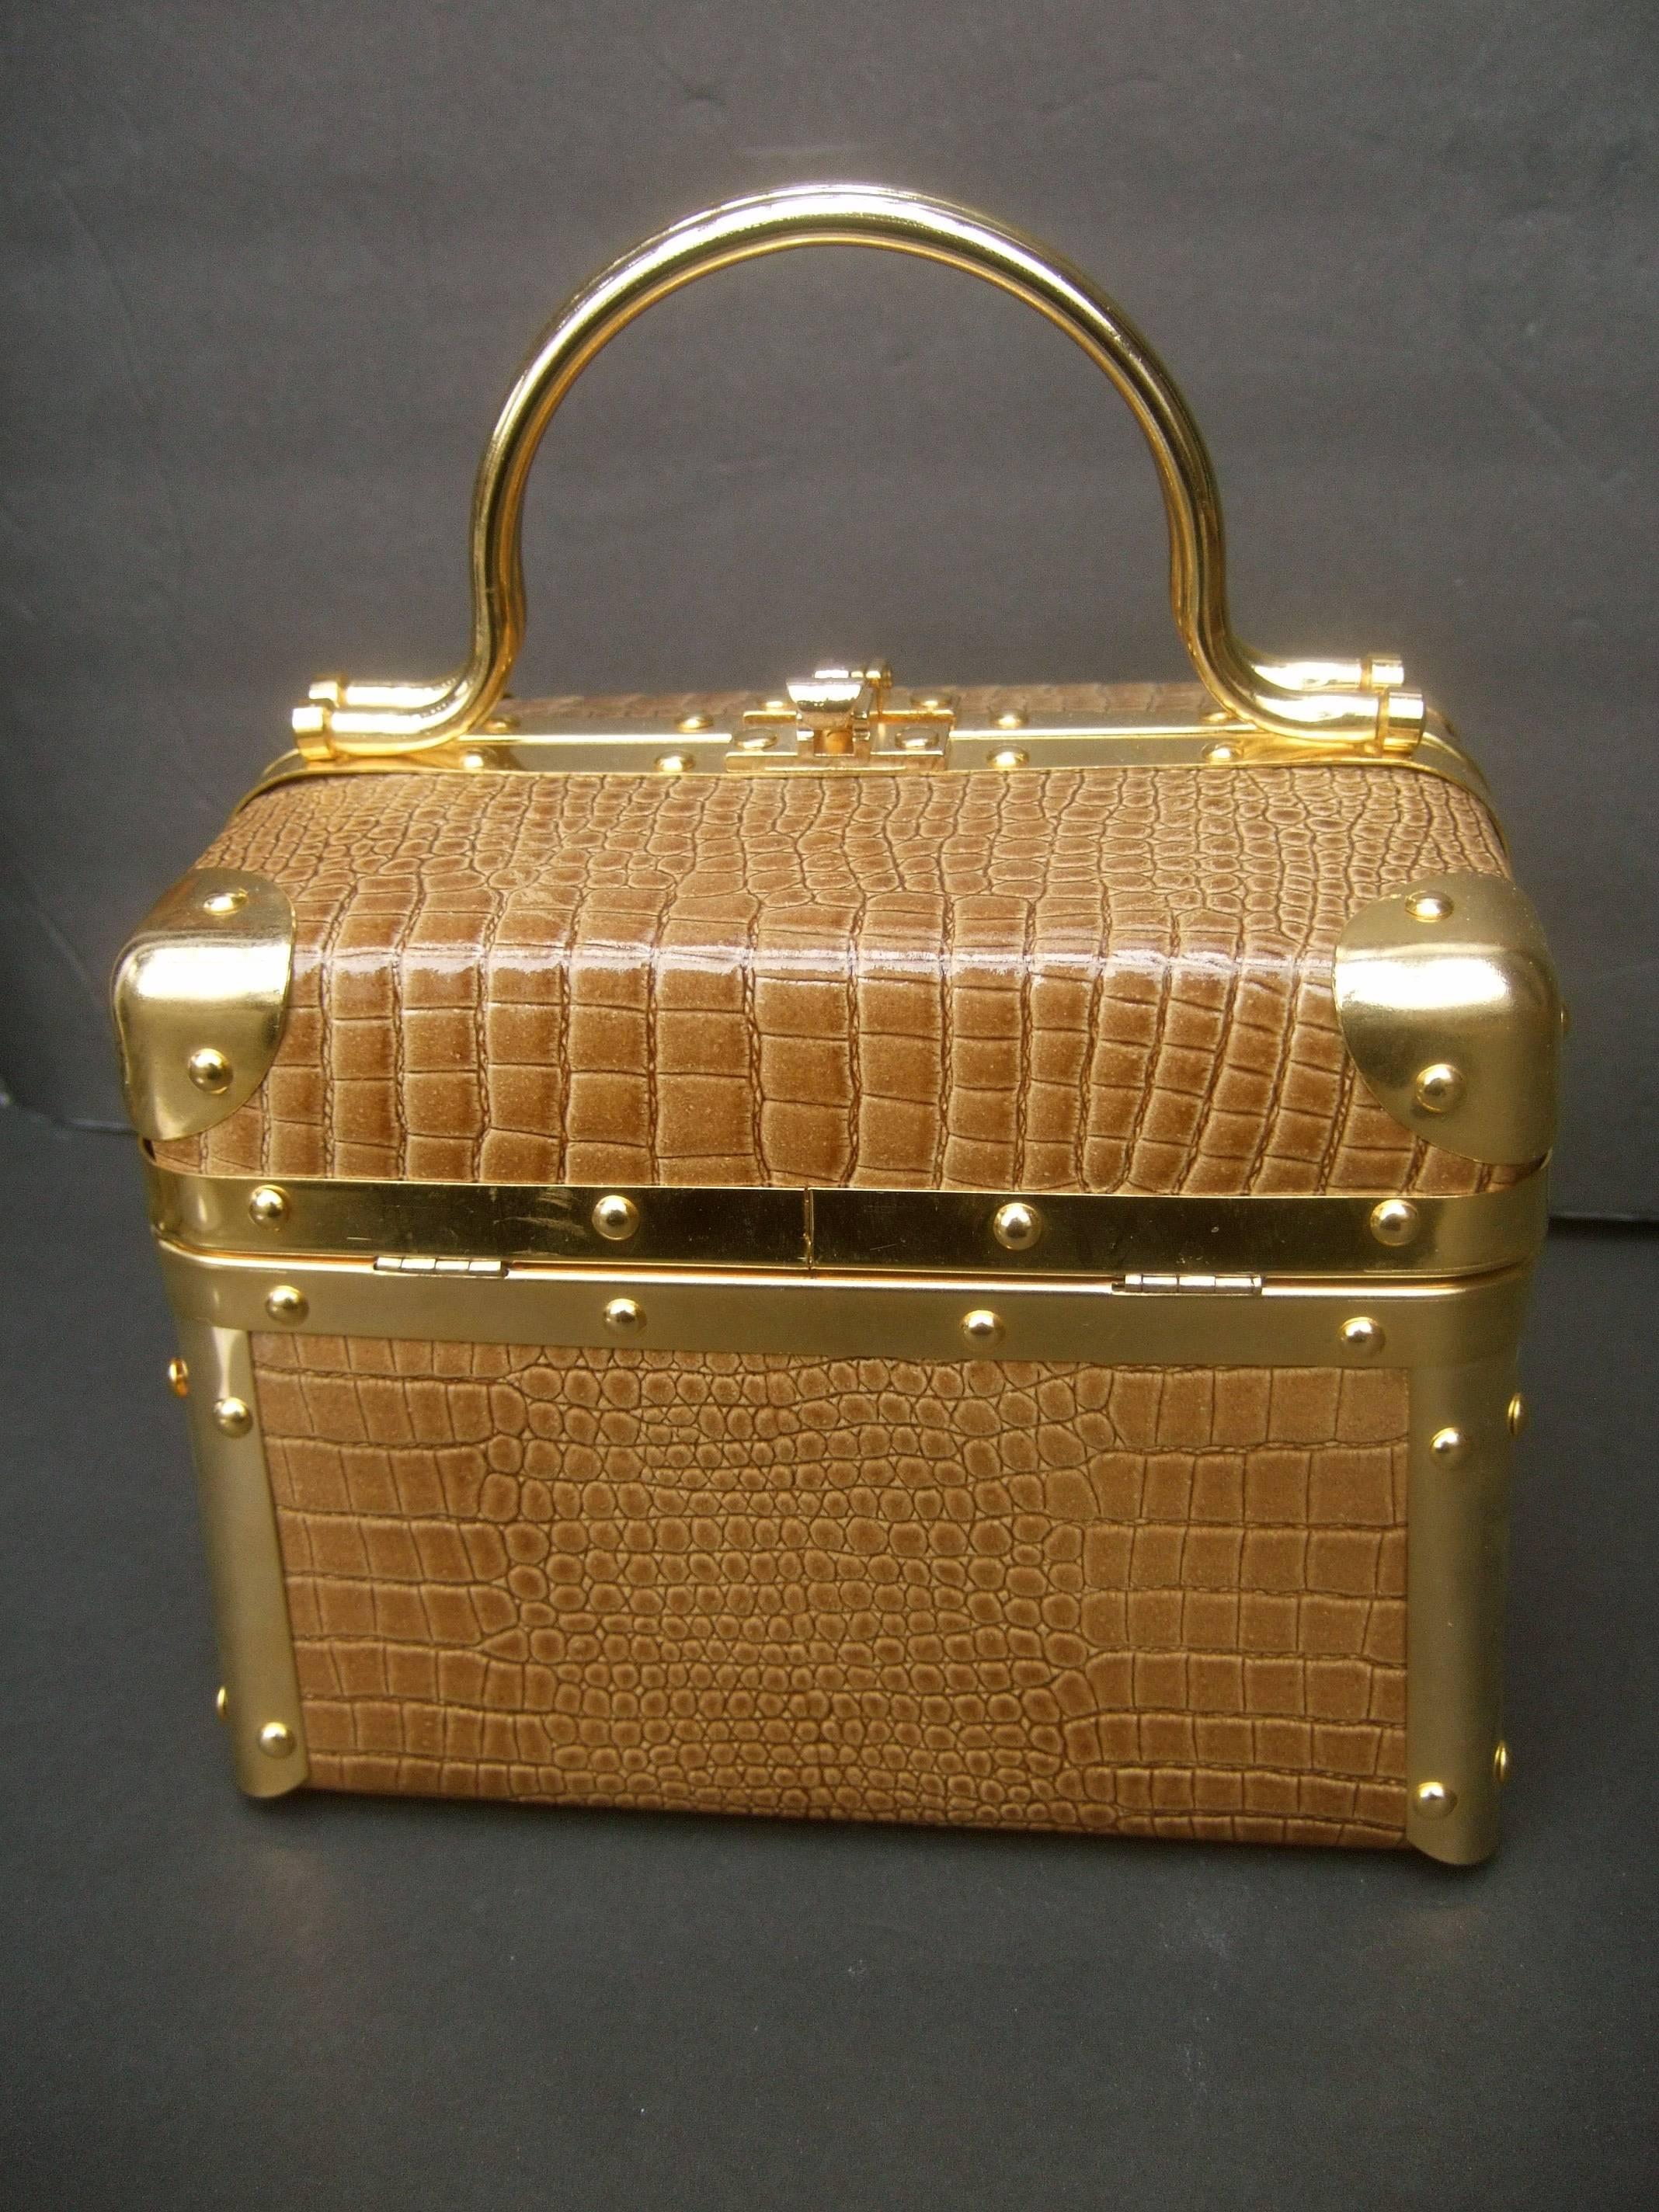 Borsa Bella Italian embossed mocha brown box purse c 1980s
The stylish Italian handbag is covered with an embossed 
vinyl covering. Adorned with sleek gilt metal swivel handles
and matching gilt metal grommet trim hardware

The interior is lined in